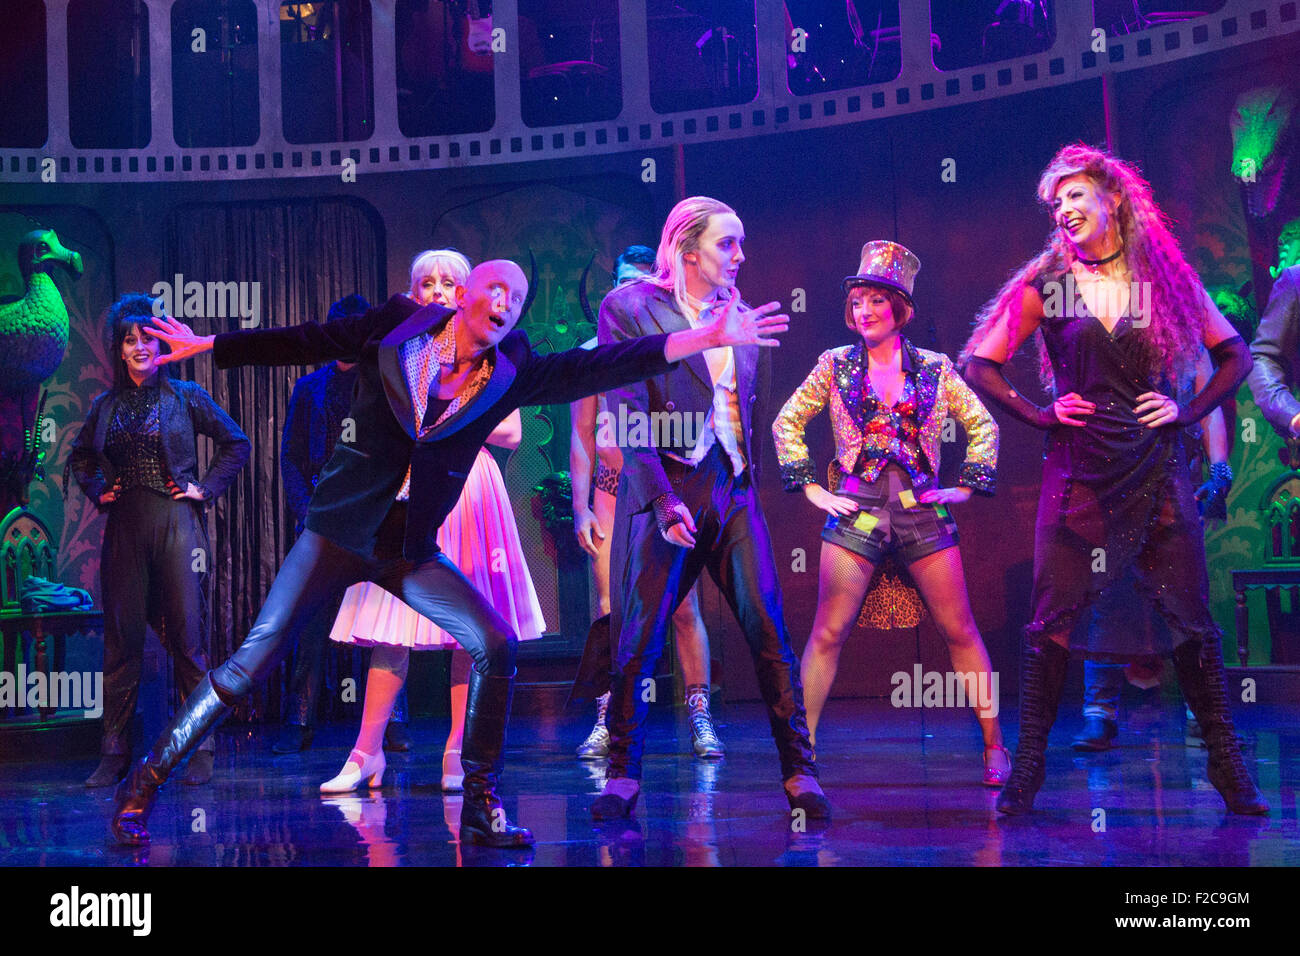 London, UK. 15 September 2015. Richard O'Brien, far left, joins the cast of his musical in the Time Warp dance on stage. The Rocky Horror Show, written and starring Richard O'Brien, returns to the West End for a limited run at the Playhouse theatre from 11 September 2015. The Rocky Horror Show Gala Performance on 17 September will be broadcast live to cinemas across the UK and Europe. With Richard O'Brien as Narrator, David Bedella as Frank'n'furter, Ben Forster as Brad, Haley Flaherty as Janet and Dominic Andersen as Rocky. Photo: Bettina Strenske Stock Photo